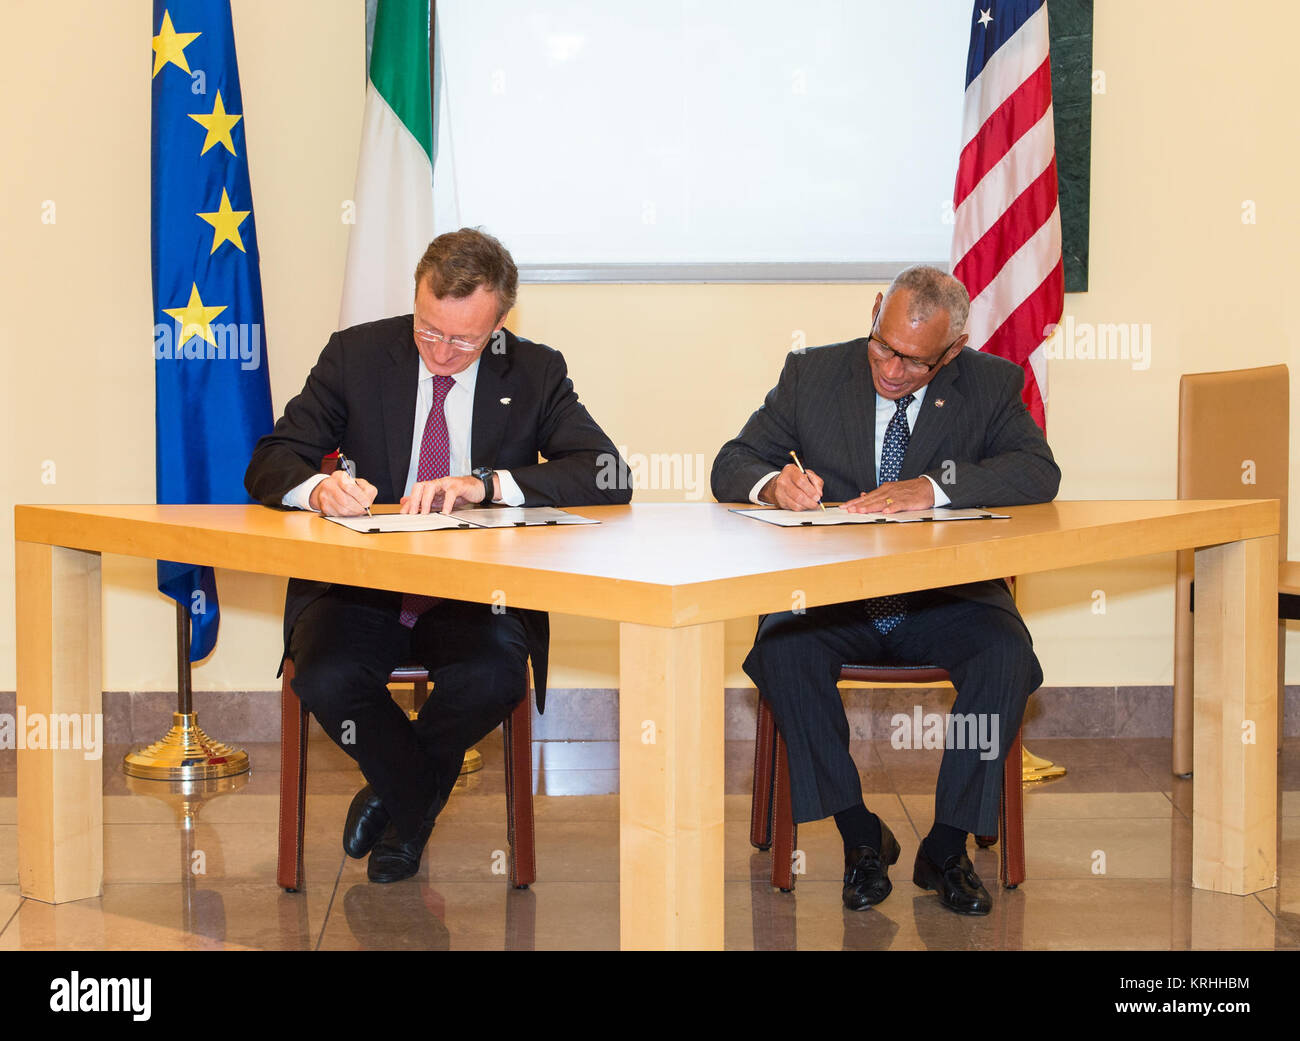 NASA Administrator Charles Bolden, right, signs a Letter of Agreement with President of the Italian Space Agency (ASI), Professor Roberto Battiston, to cooperate on Earth observation research, including environmental monitoring and disaster management, on Wednesday, September 9, 2015 at the Italian Embassy in Washington, DC. Photo Credit: (NASA/Aubrey Gemignani). NASA Bilateral Agreement with Italian Space Agency (NHQ201509090002) Stock Photo